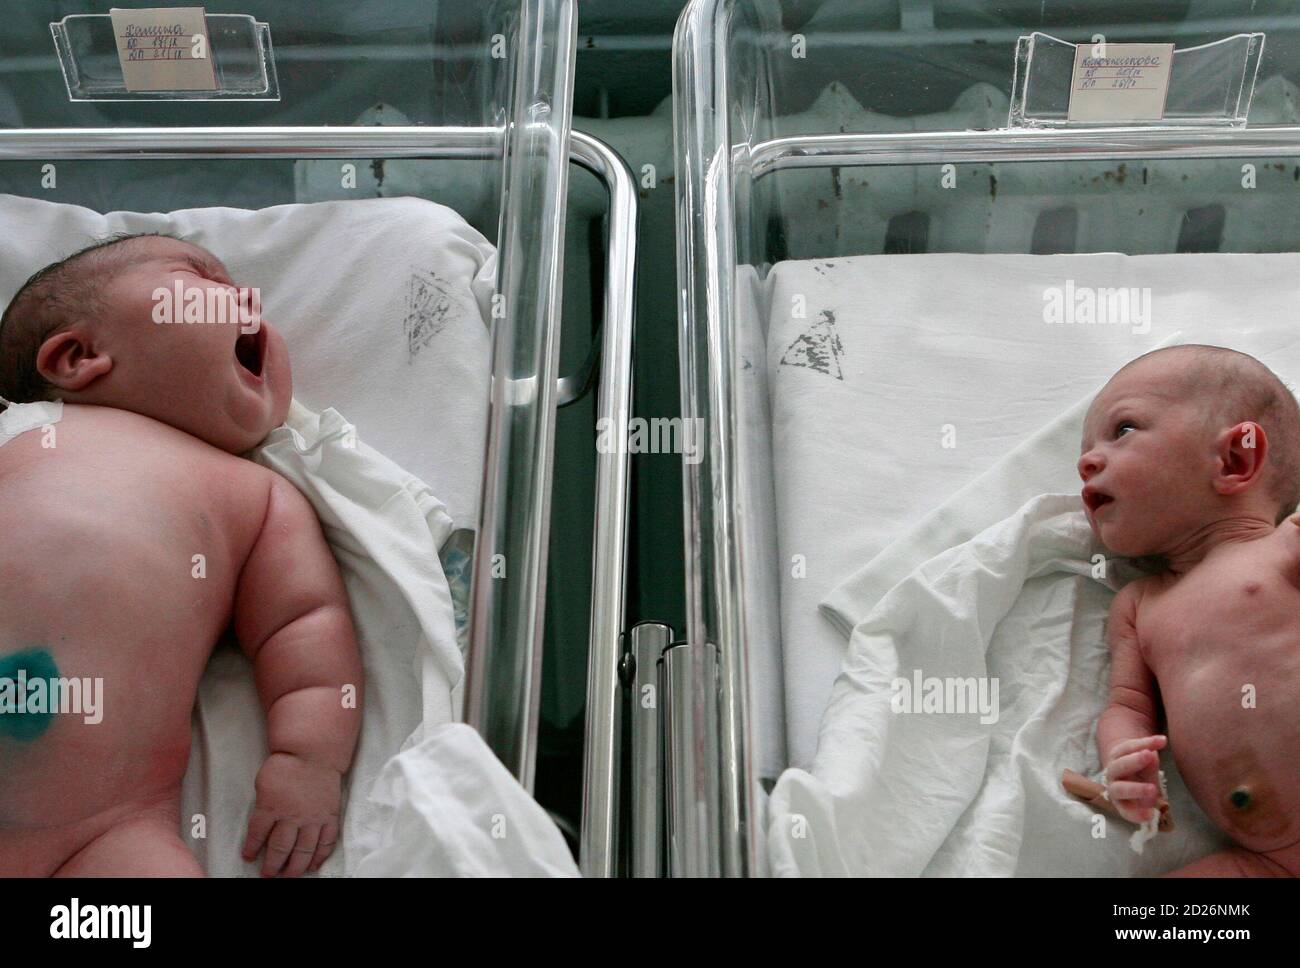 Baby girl Nadia (L), who weighed 7.75 kg (17.1 lbs) after birth, lies in a maternity ward in the Siberian city of Barnaul September 26, 2007. One Siberian mother has done more than her fair share to heal Russia's dire population decline. Tatyana Khalina shocked her husband by giving birth to a 7.75 kg (17.1 lbs) baby girl this month, her 12th child.  REUTERS/Andrey Kasprishin (RUSSIA) Foto Stock